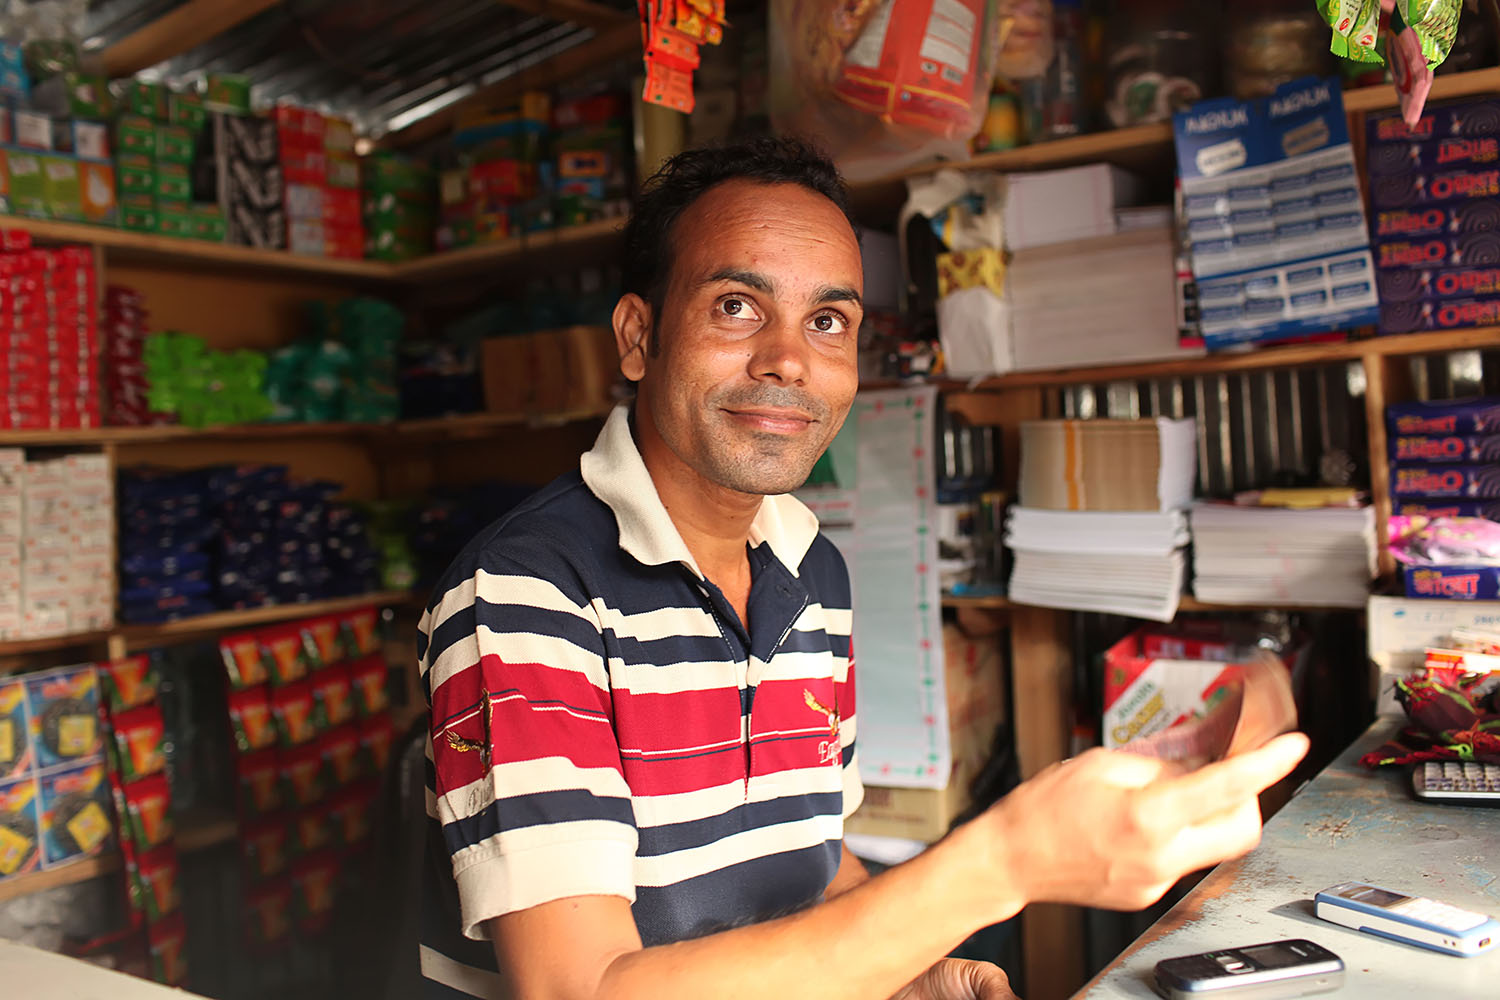 This is Shahin, who is back home with his family and has set up a provisions shop, having left Singapore for good